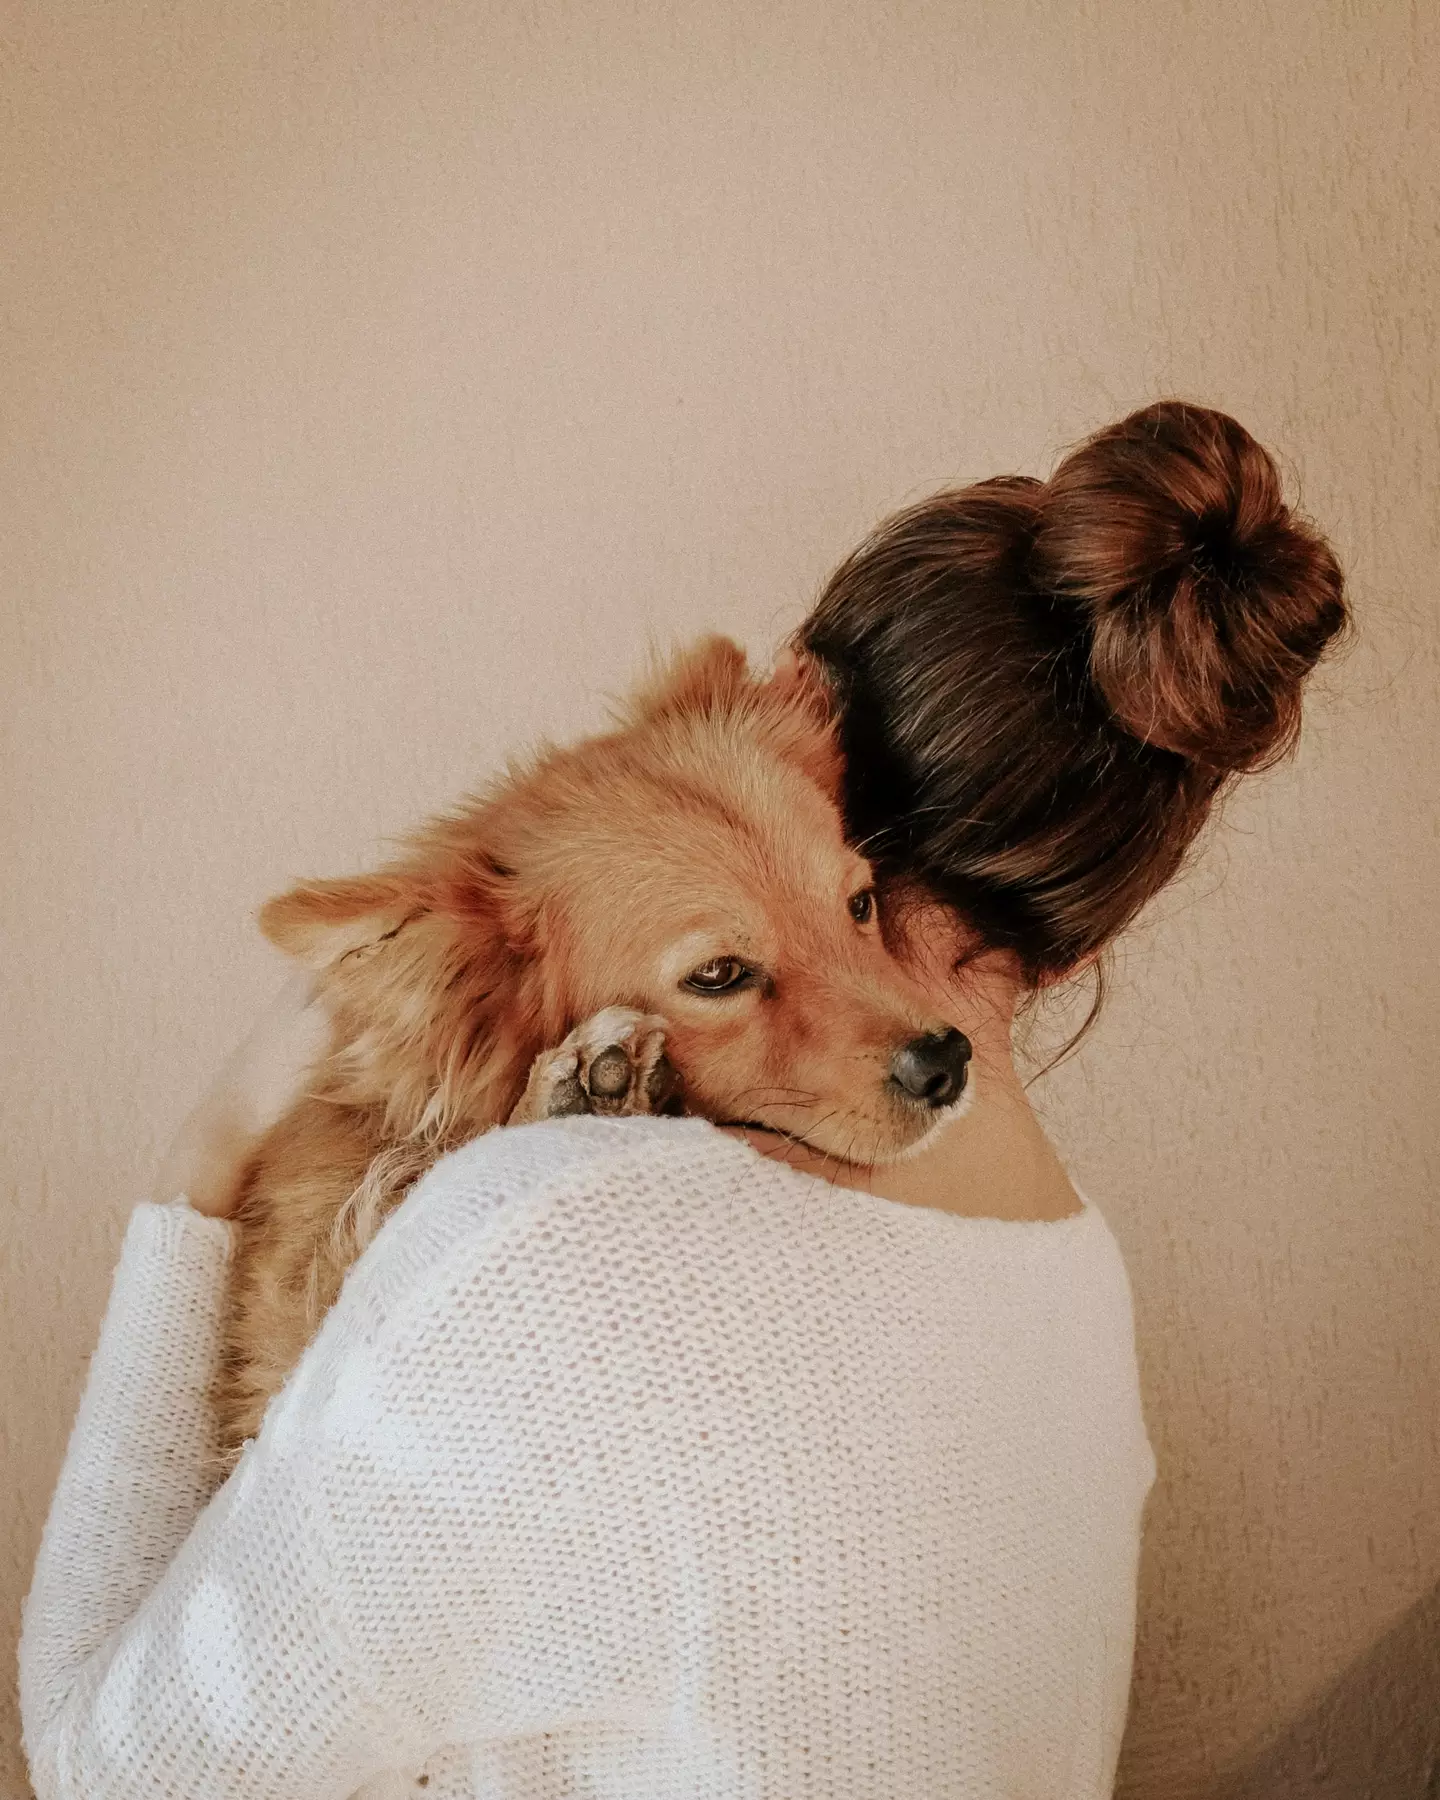 This might make you think twice about hugging your pooch.